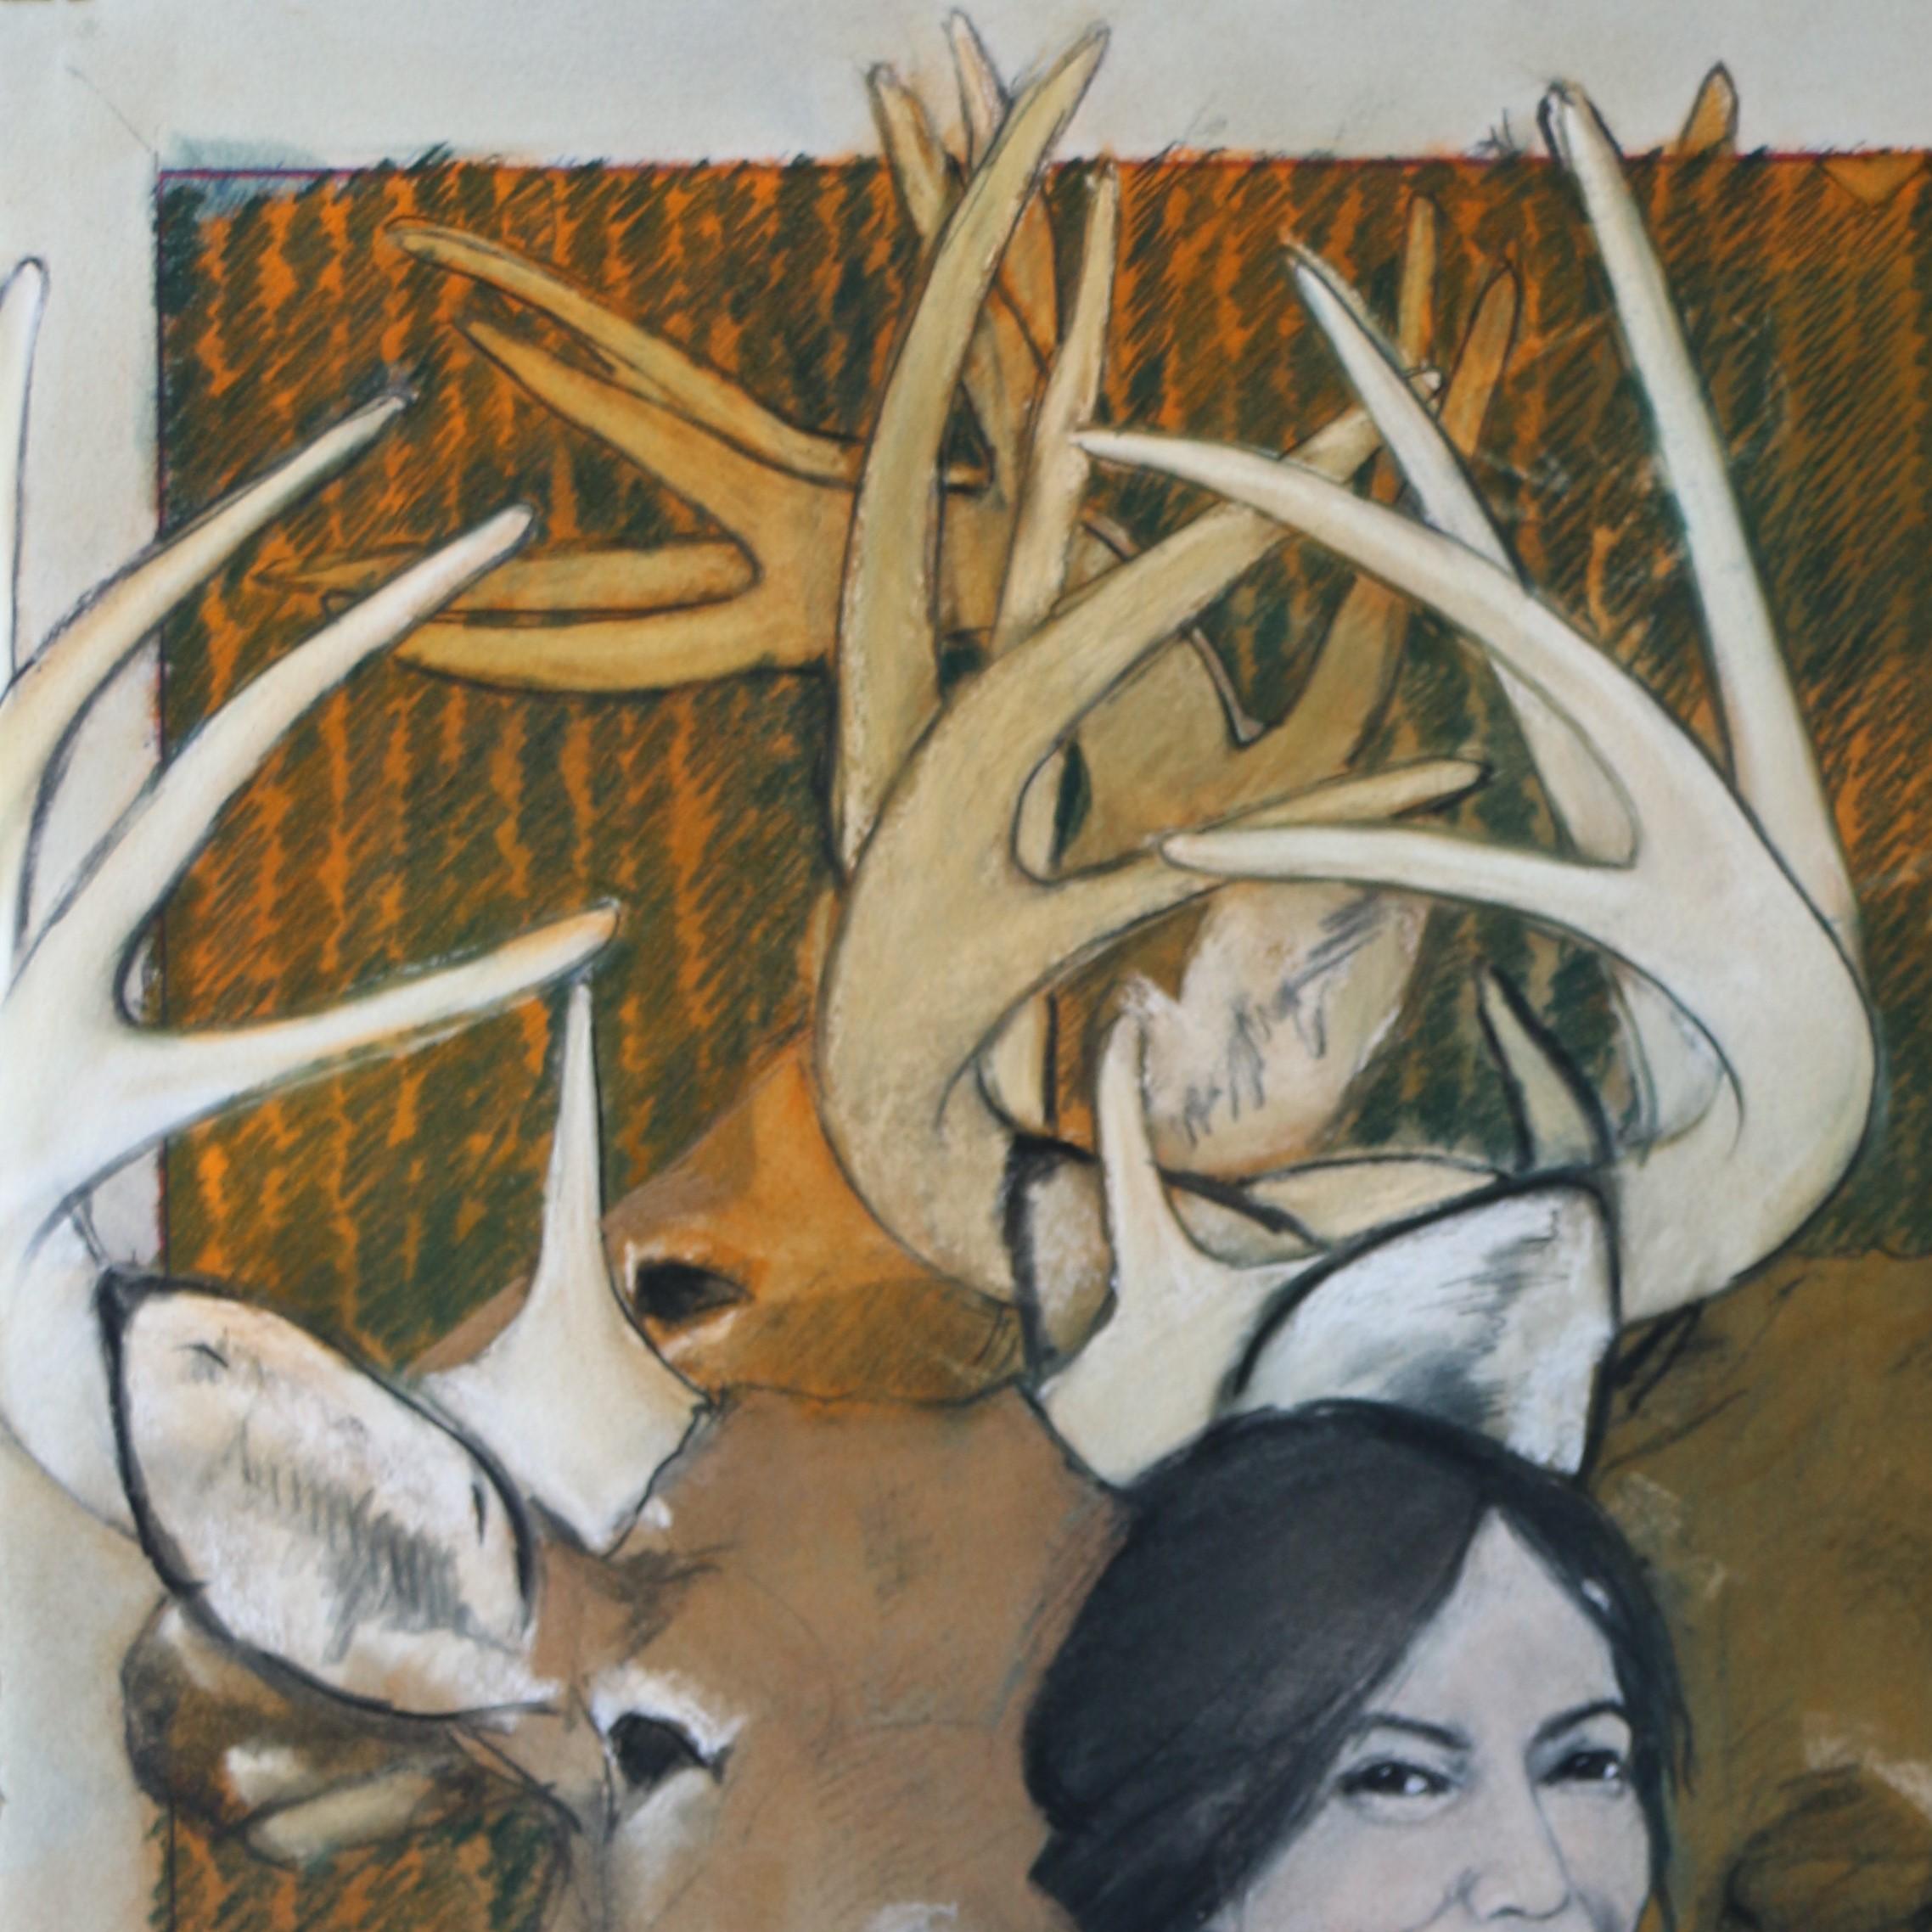 Crowned By Morning Light (woman, deer, cowgirl, antlers) - Art by Donna Howell-Sickles